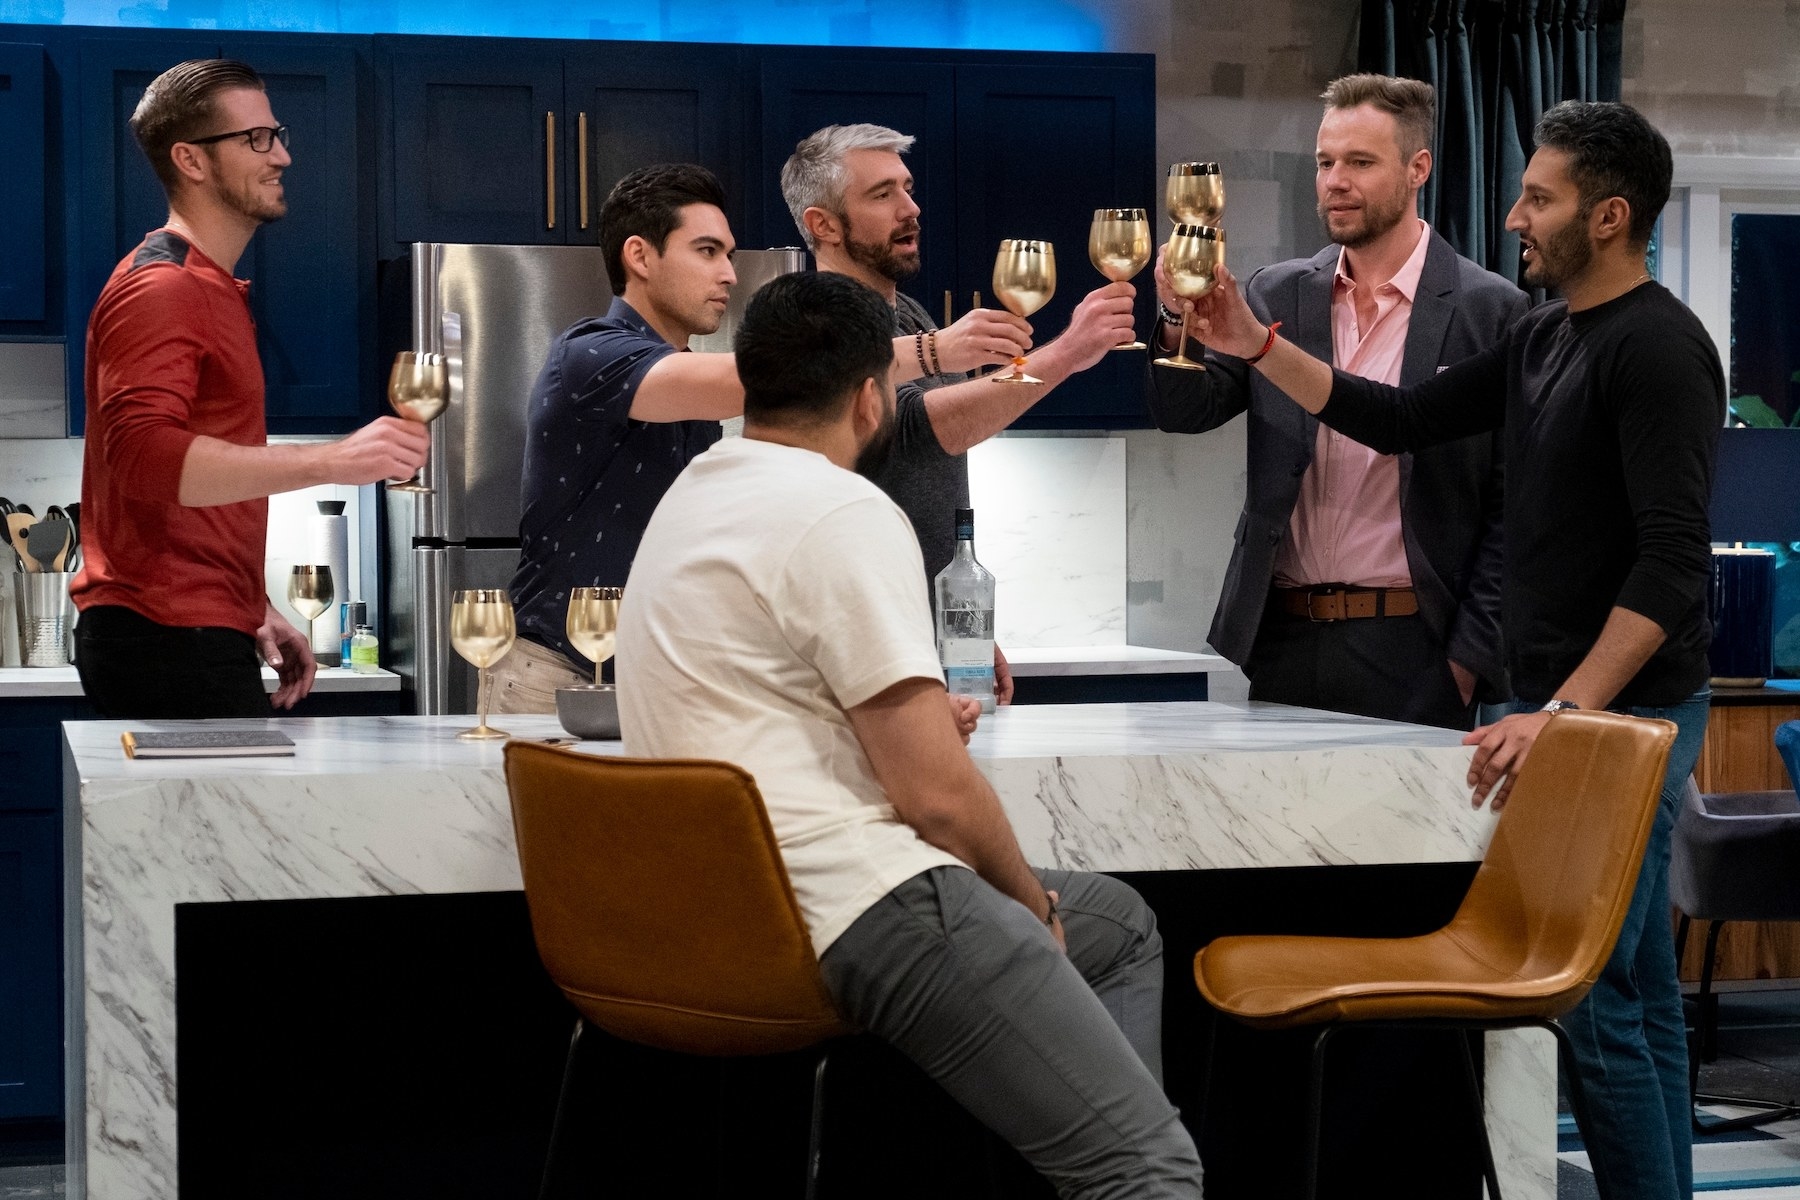 Male contestants of the show making a toast